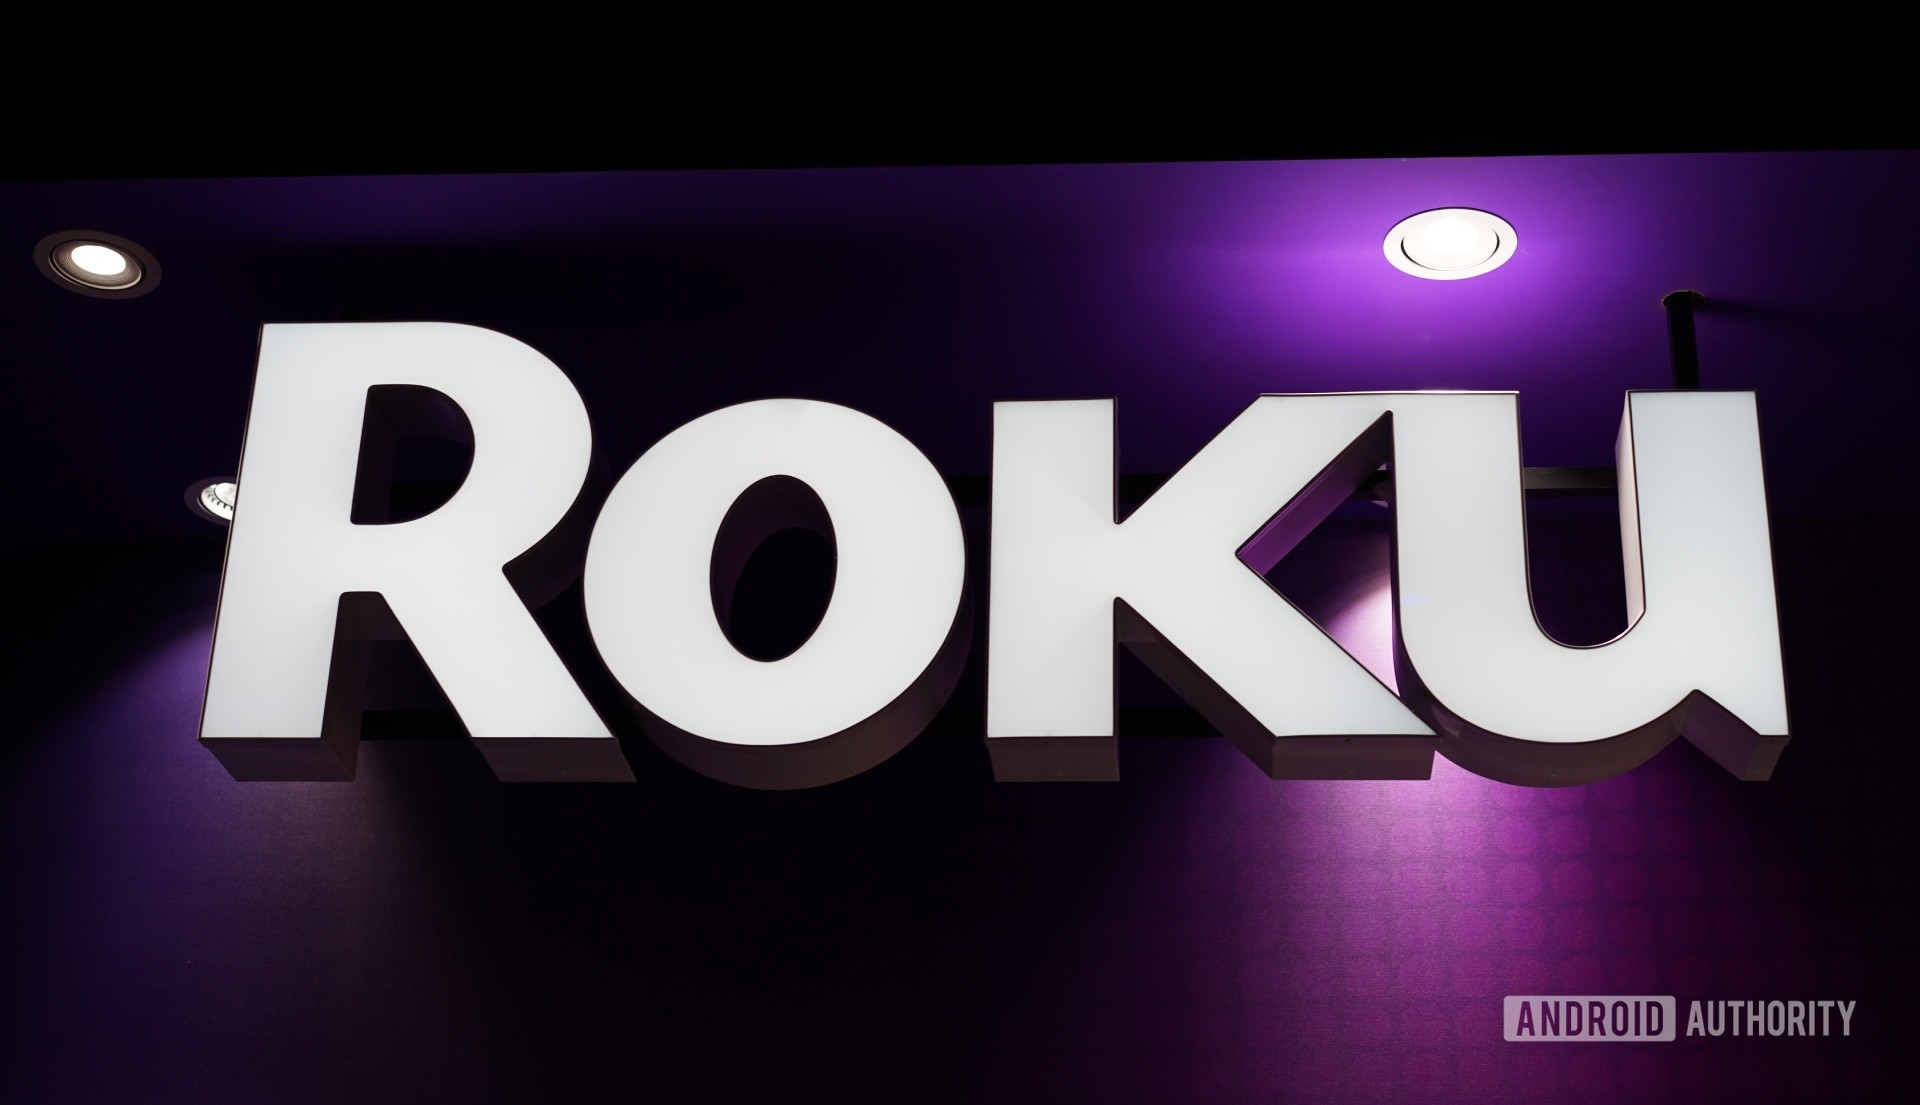 The Roku logo promoting Roku devices as seen at IFA 2019.